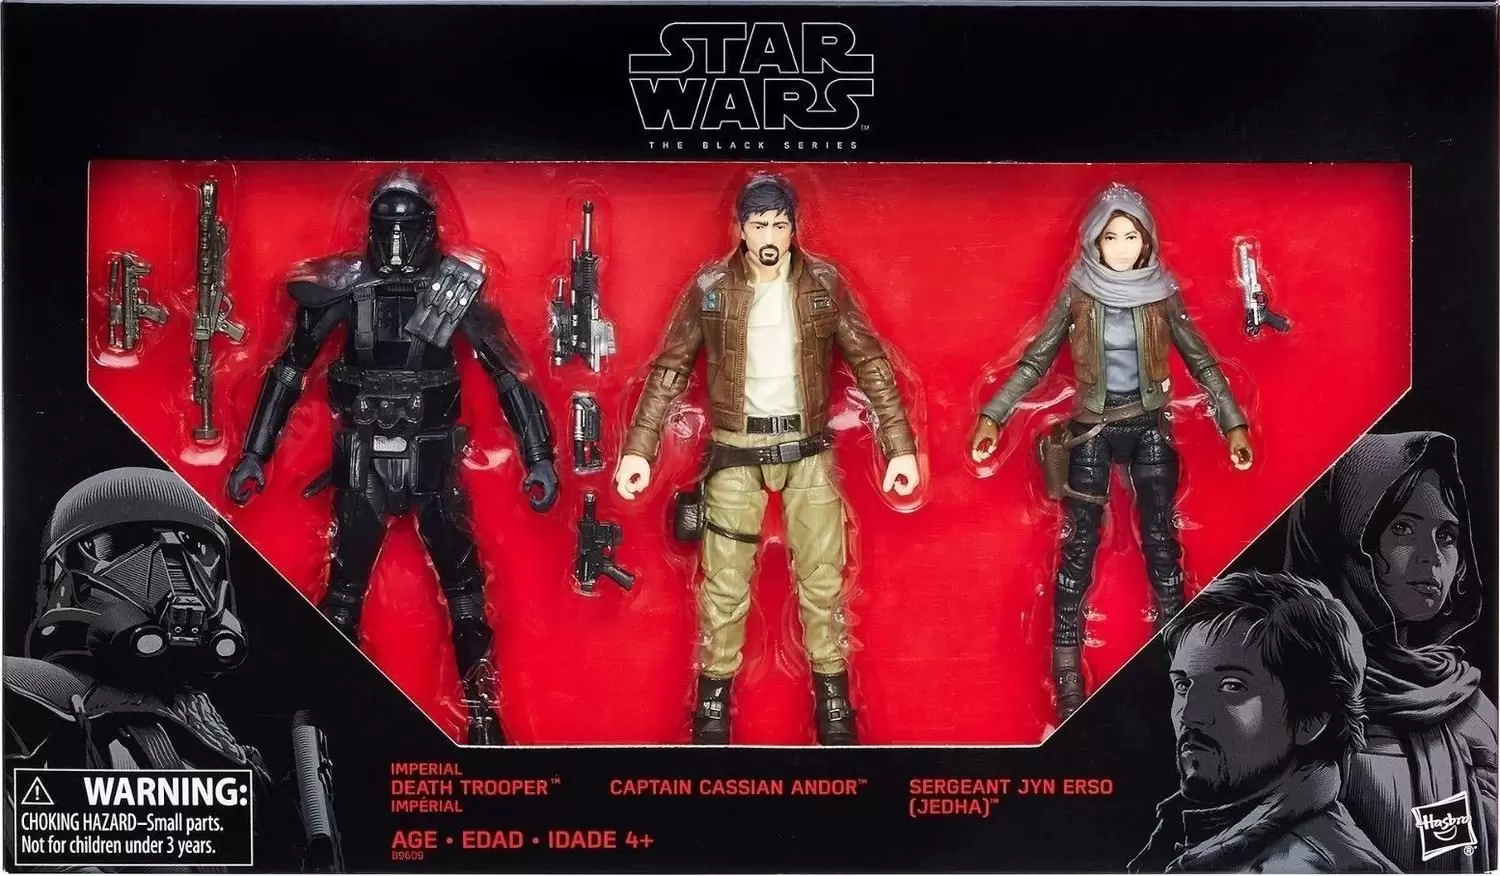 Black Series Red - 6 pouces - Captain Cassian Andor, Sergeant Jyn Erso (Jedha) & Imperial Deathtrooper (Exclusive)